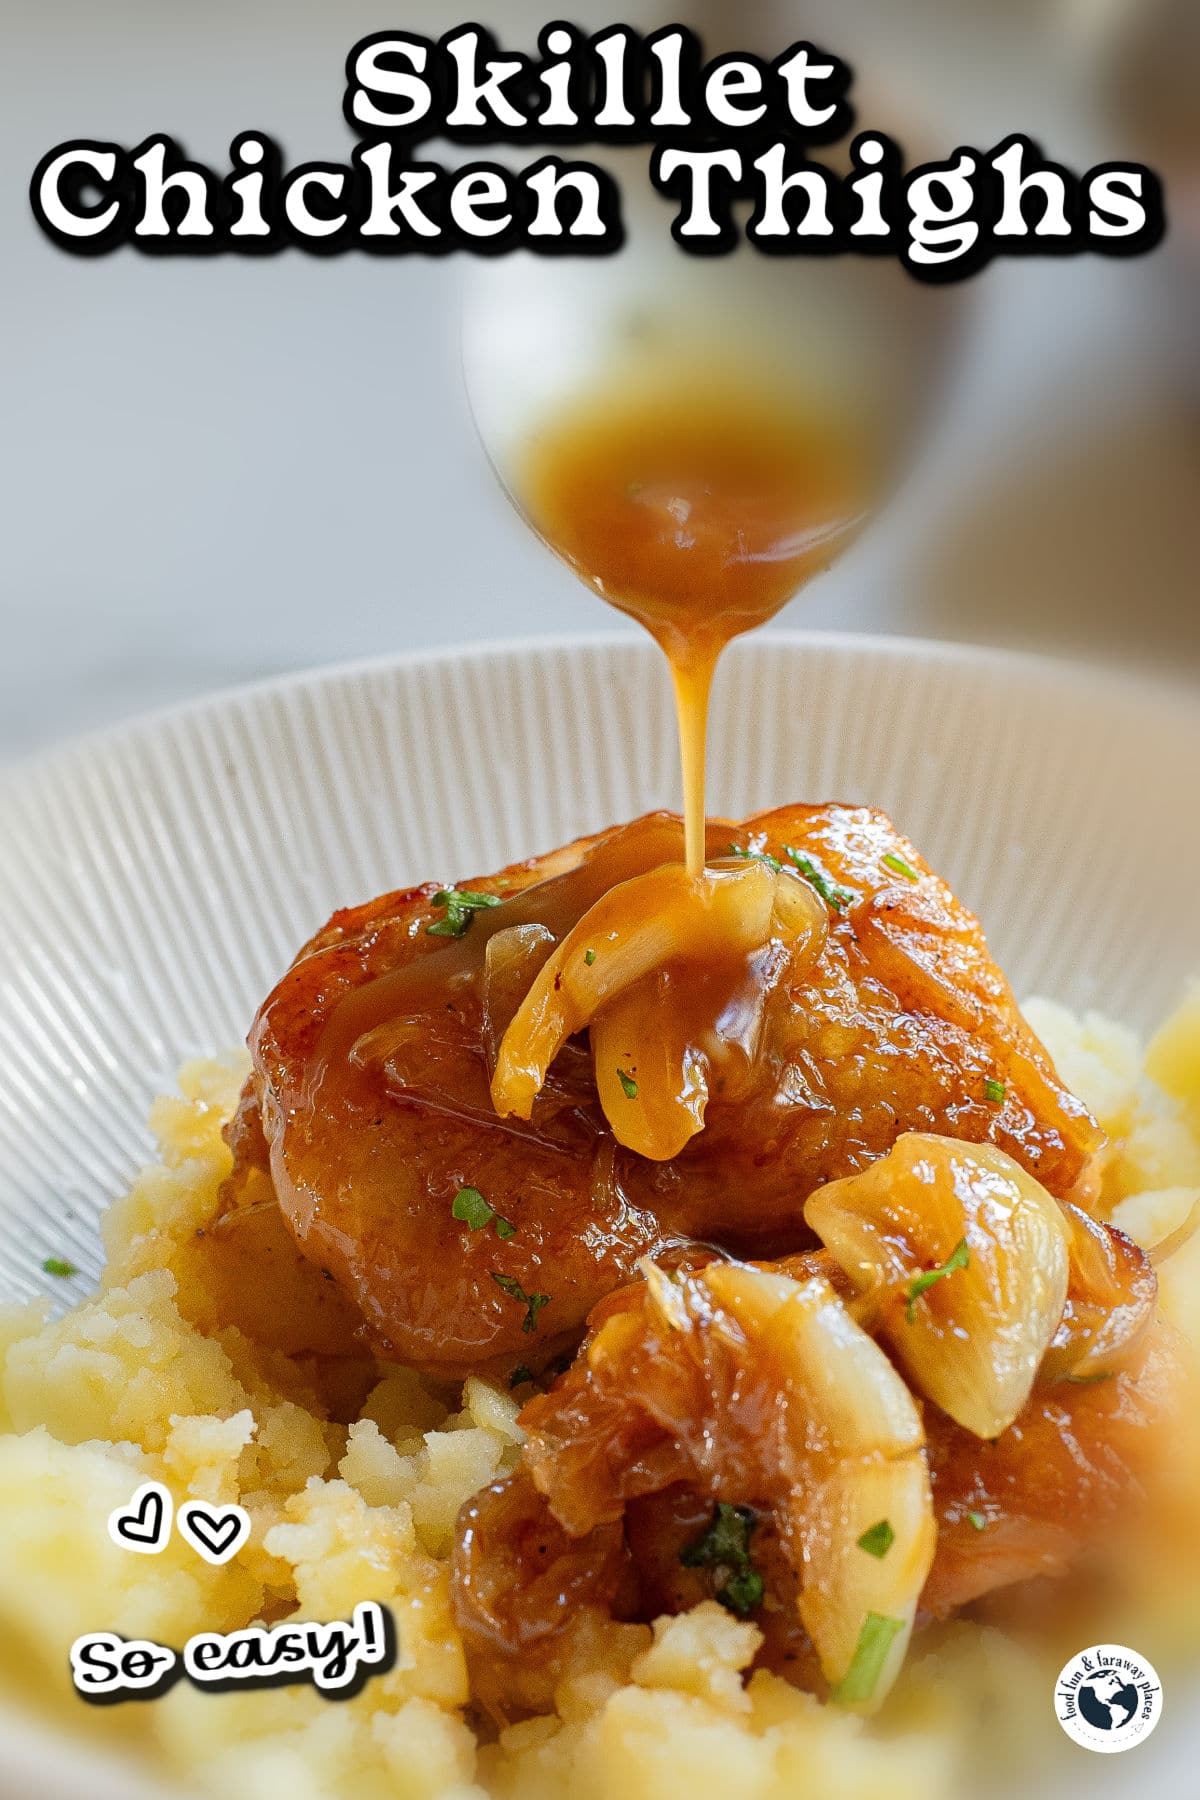 Chicken thighs over mashed potatoes with spoon dripping gravy over dish.